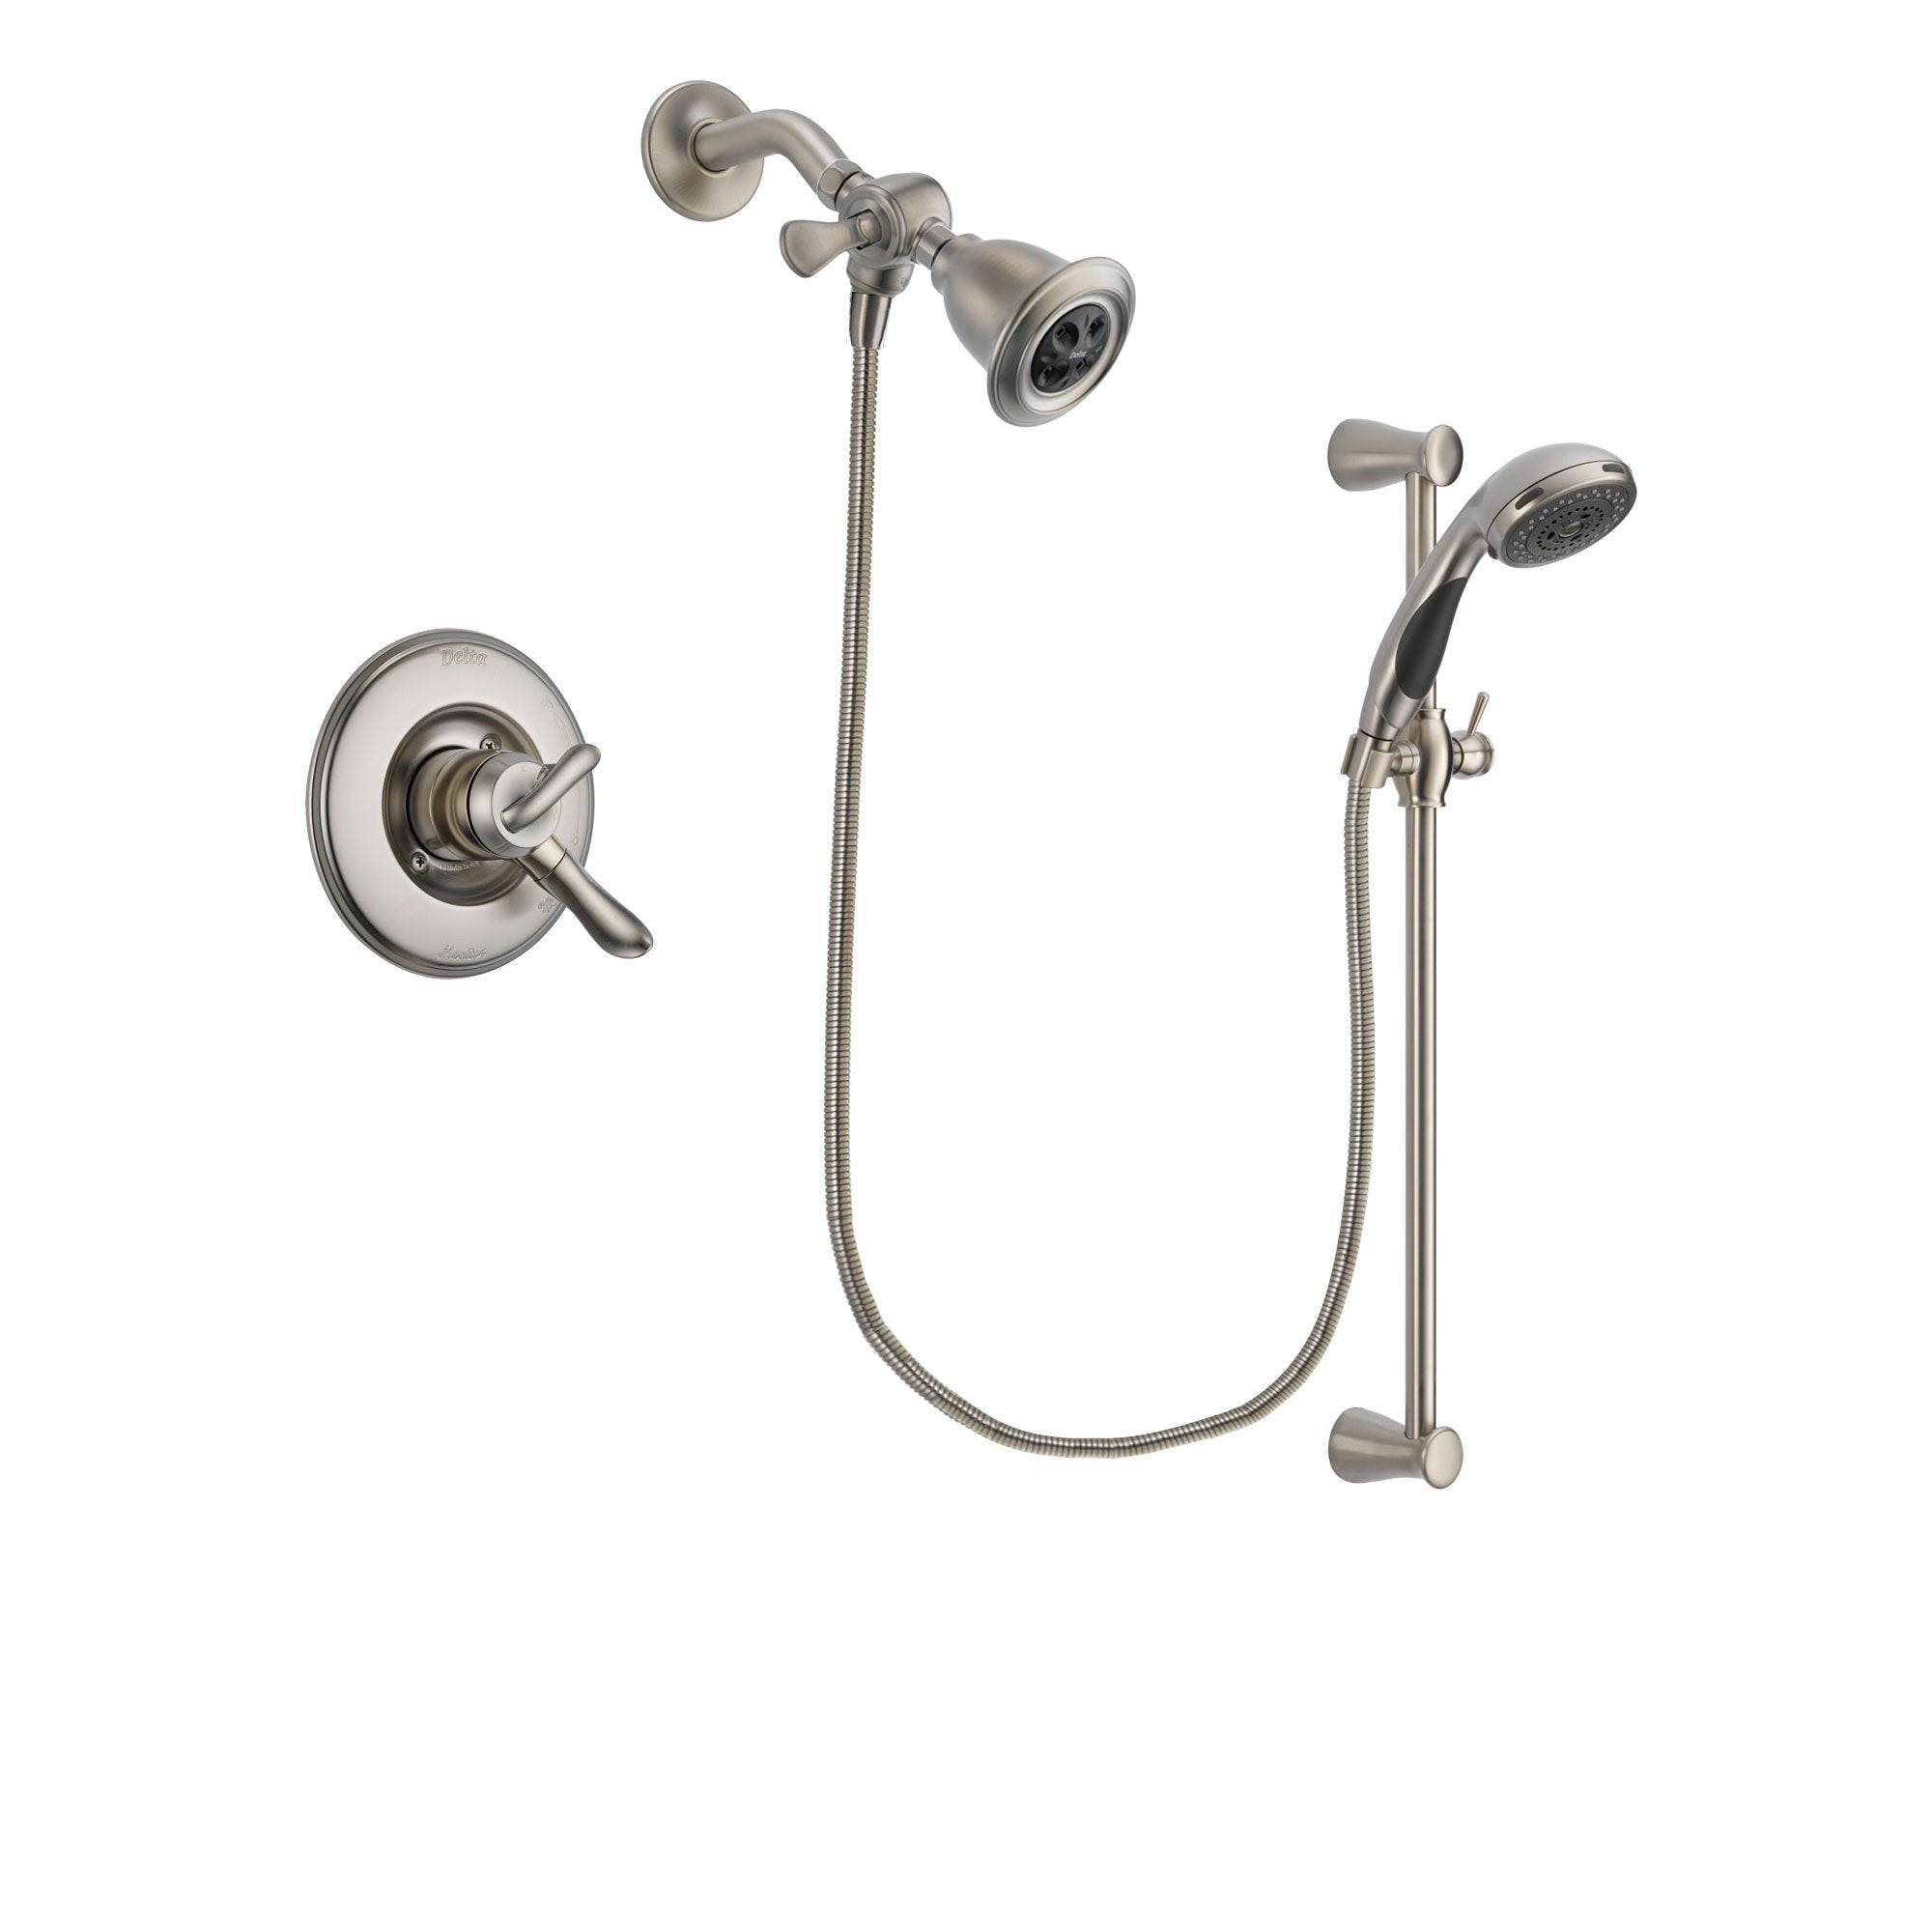 Delta Linden Stainless Steel Finish Dual Control Shower Faucet System Package with Water Efficient Showerhead and Handheld Shower Spray with Slide Bar Includes Rough-in Valve DSP1578V